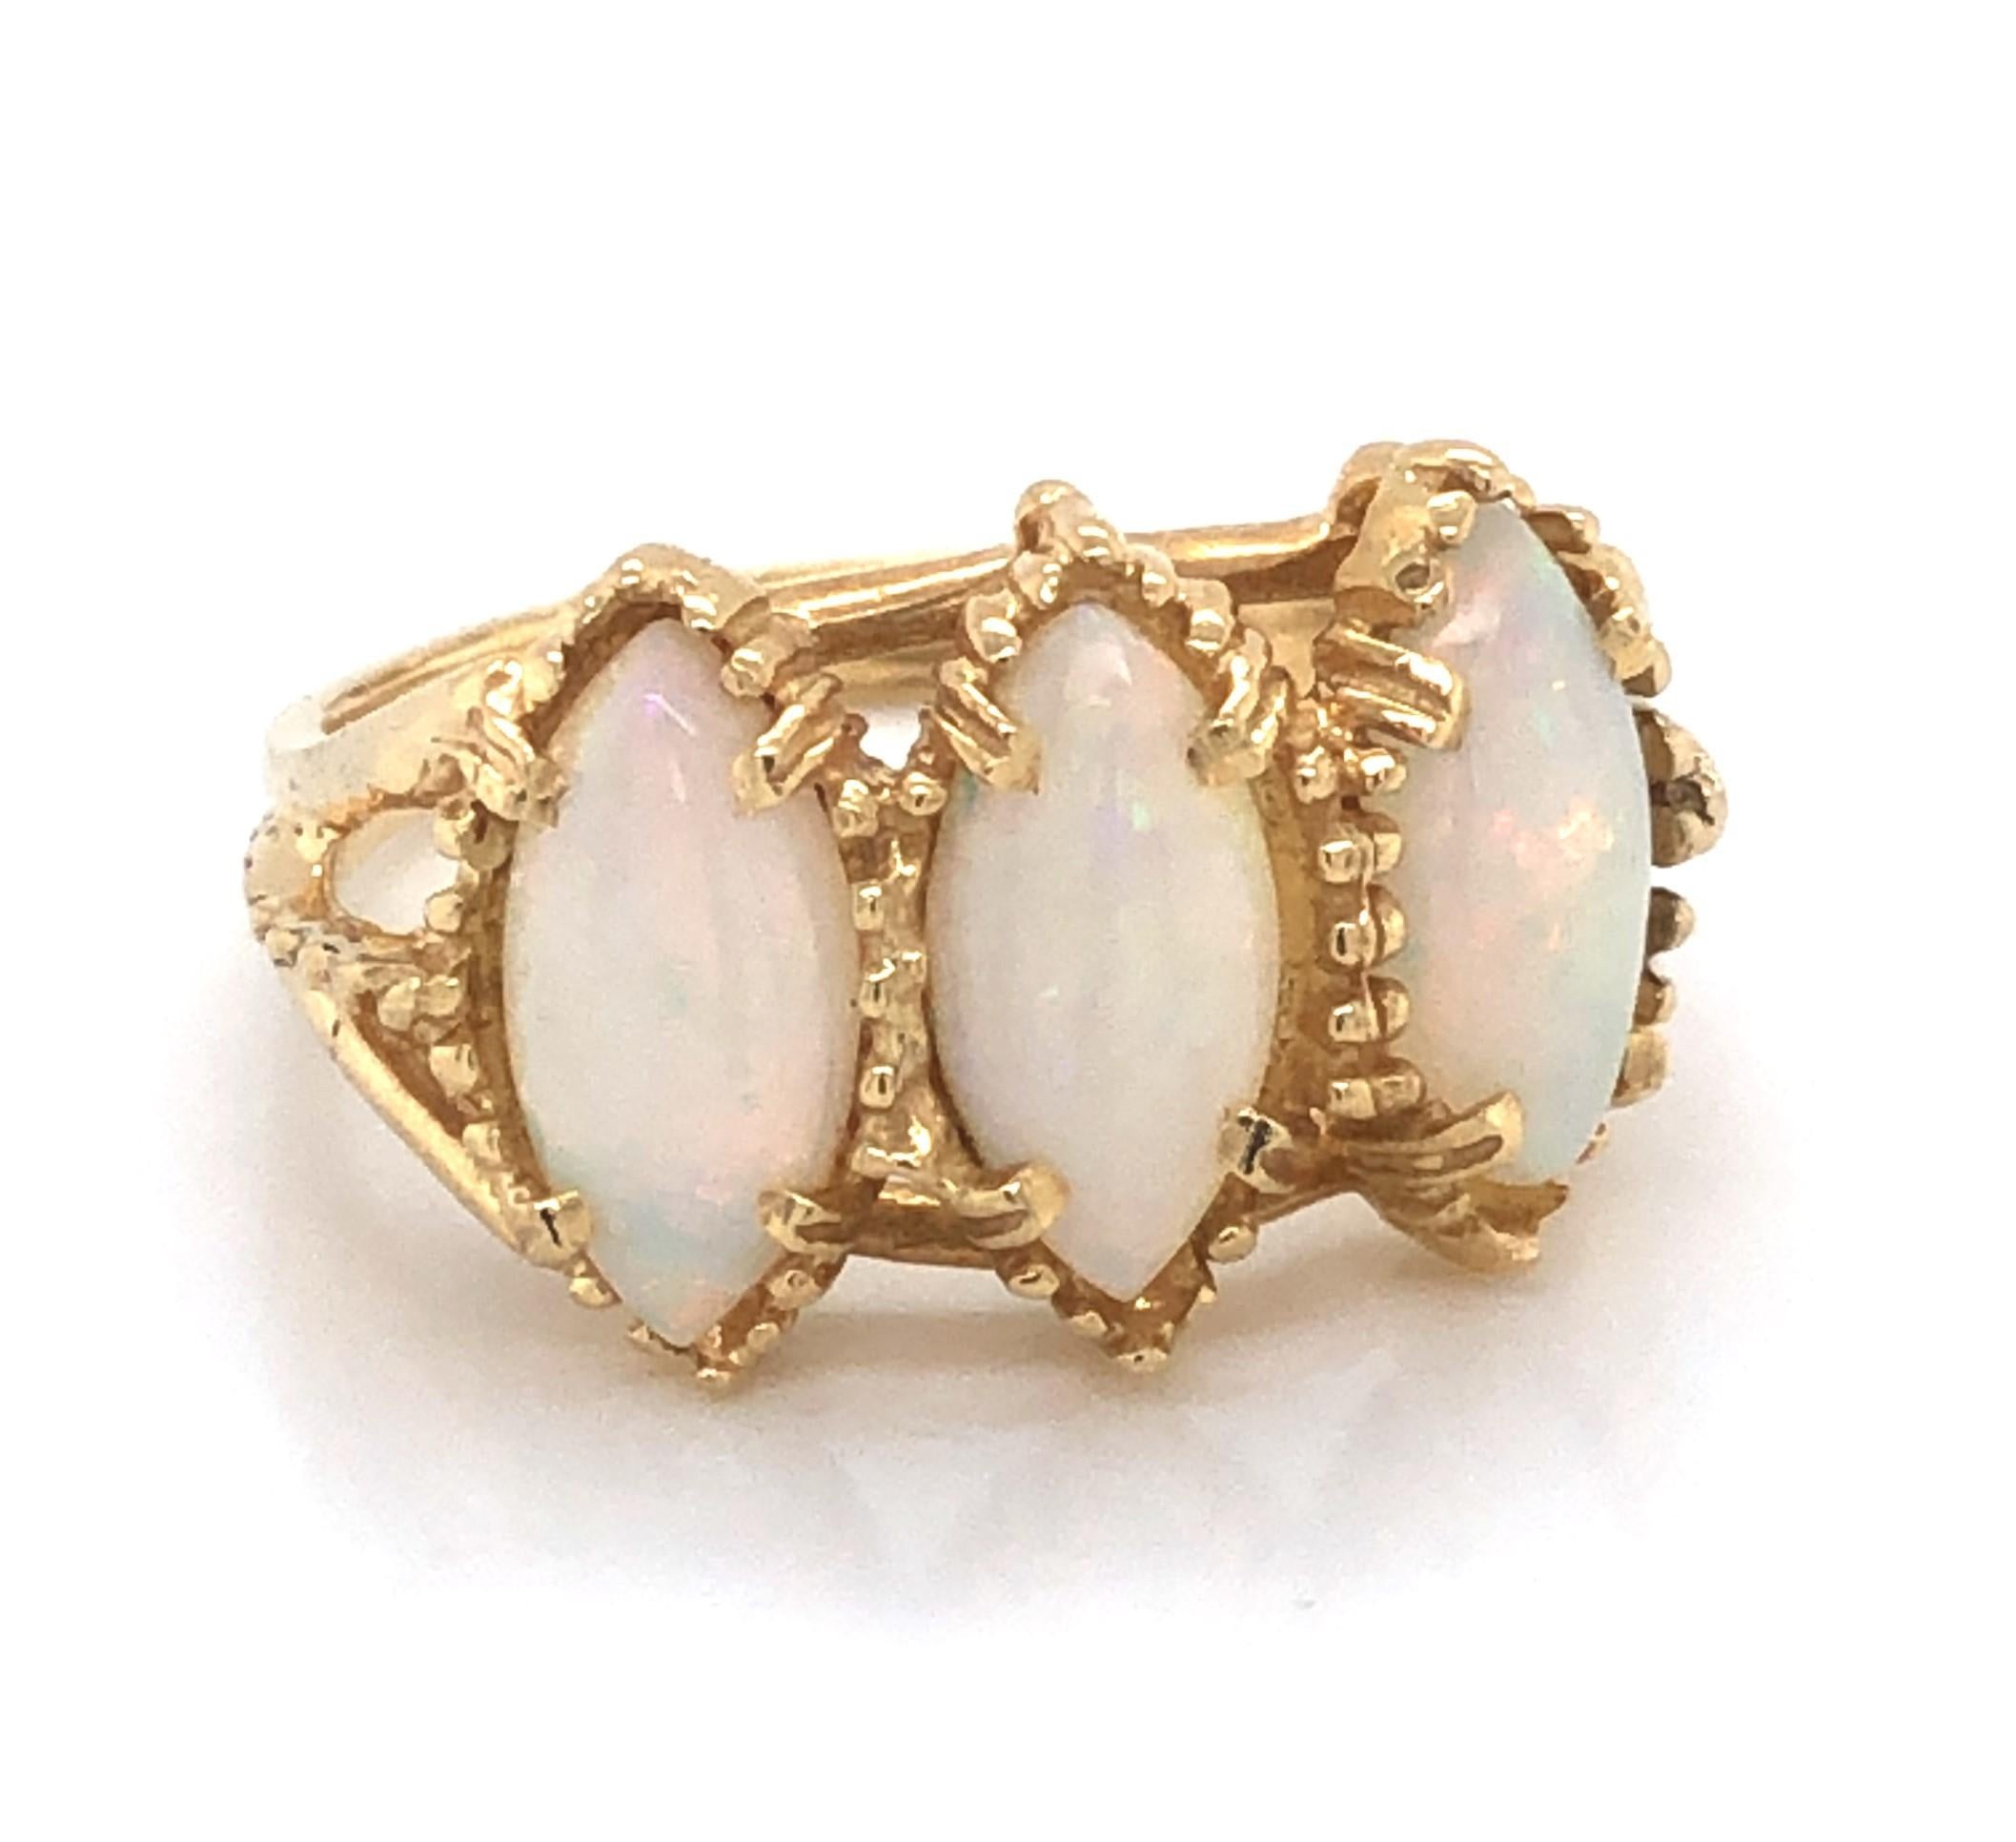 Naturally romantic, a trio of marquise cut iridescent opal cabochons certainly draw attention to this lovely antique style ring created in fourteen karat 14k yellow gold.
The decorative split shank leads to a beautiful presentation of three .50